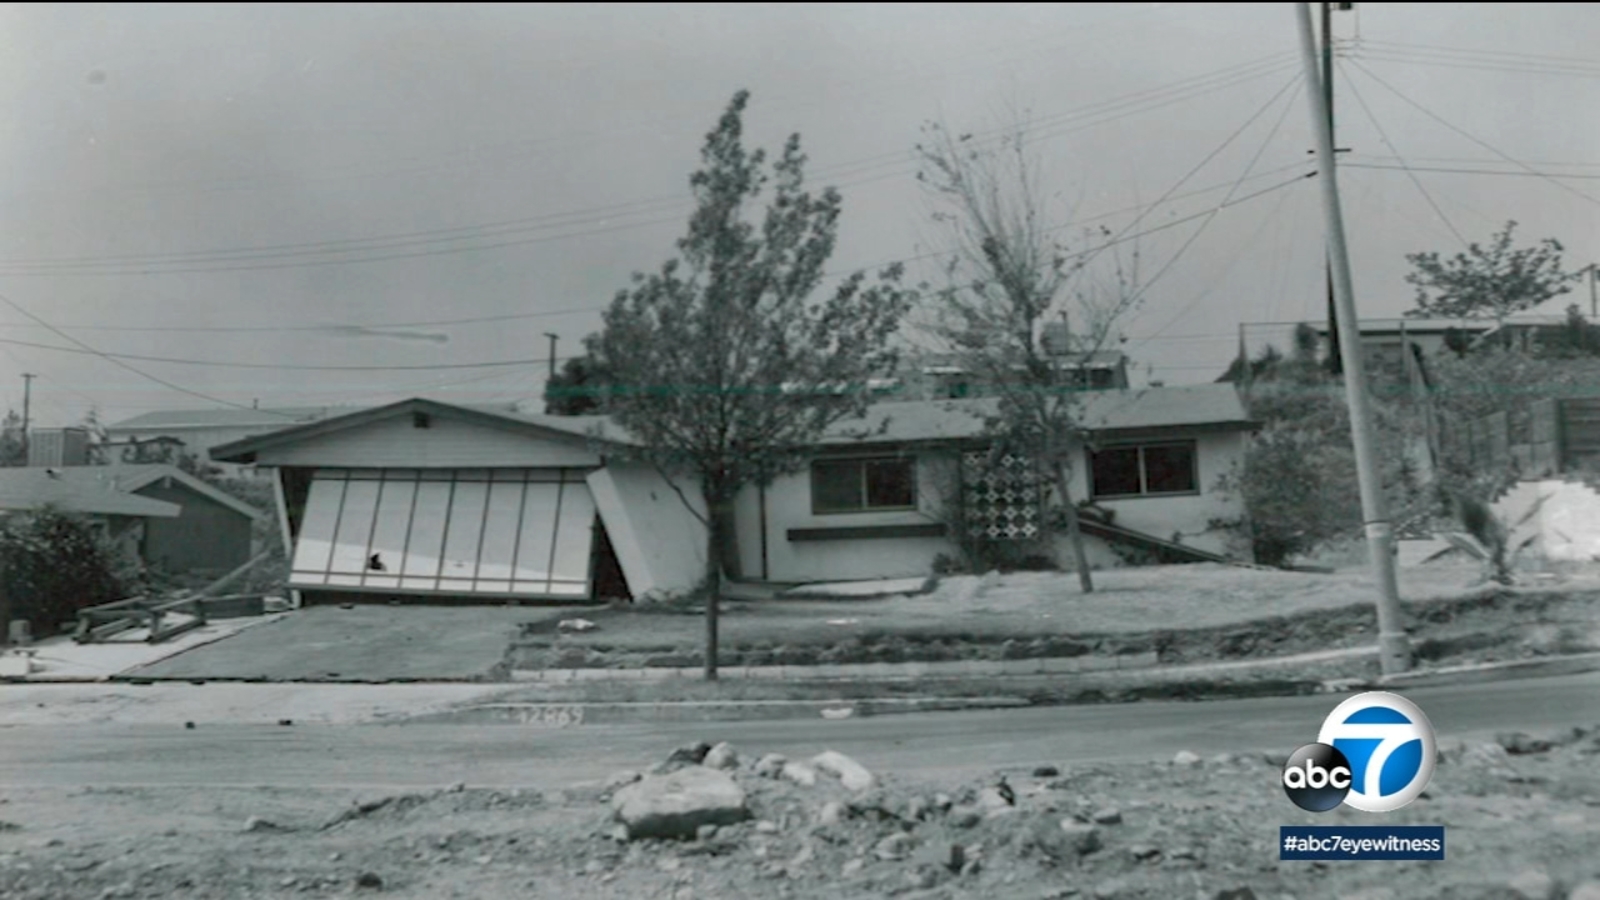 Sylmar earthquake 50 years later: Destructive temblor marked turning point in the science of quakes